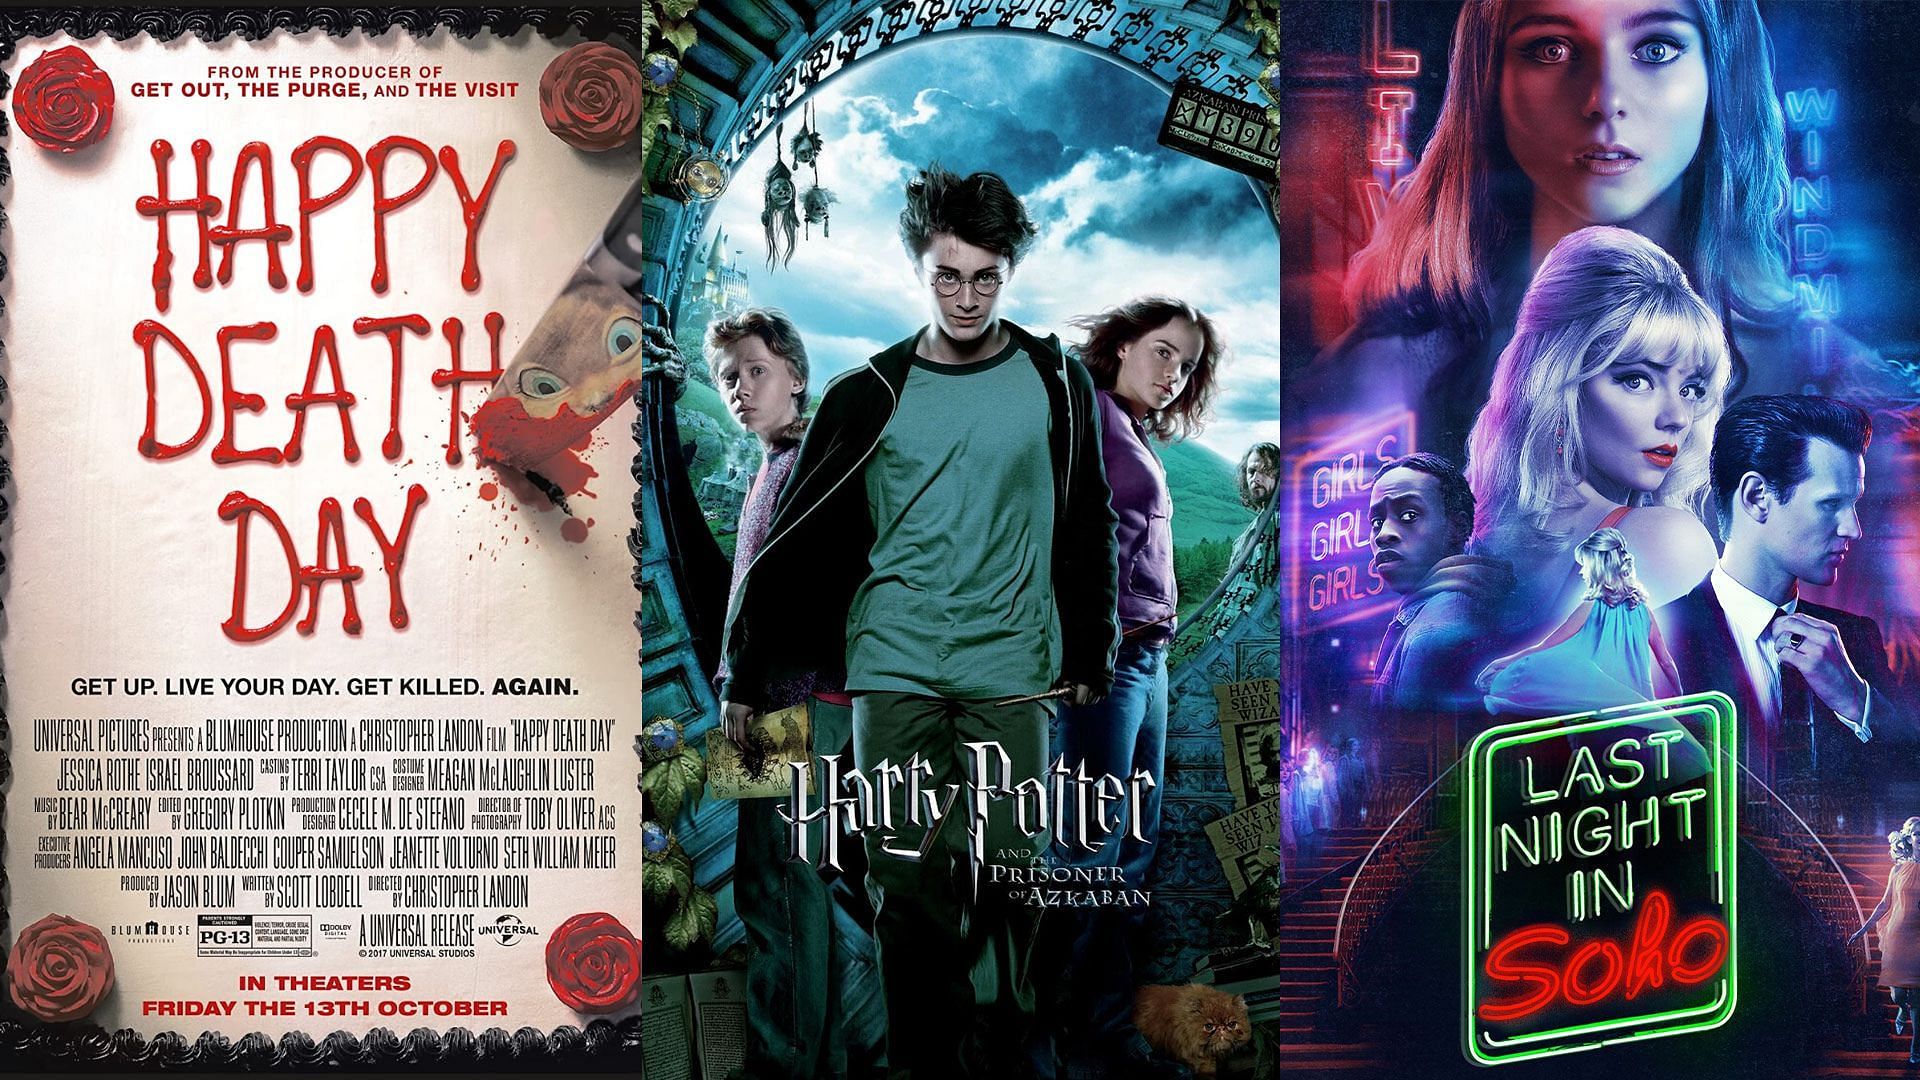 Happy Death Day, Harry Potter and the Prisoner of Azkaban, and Last Night In Soho